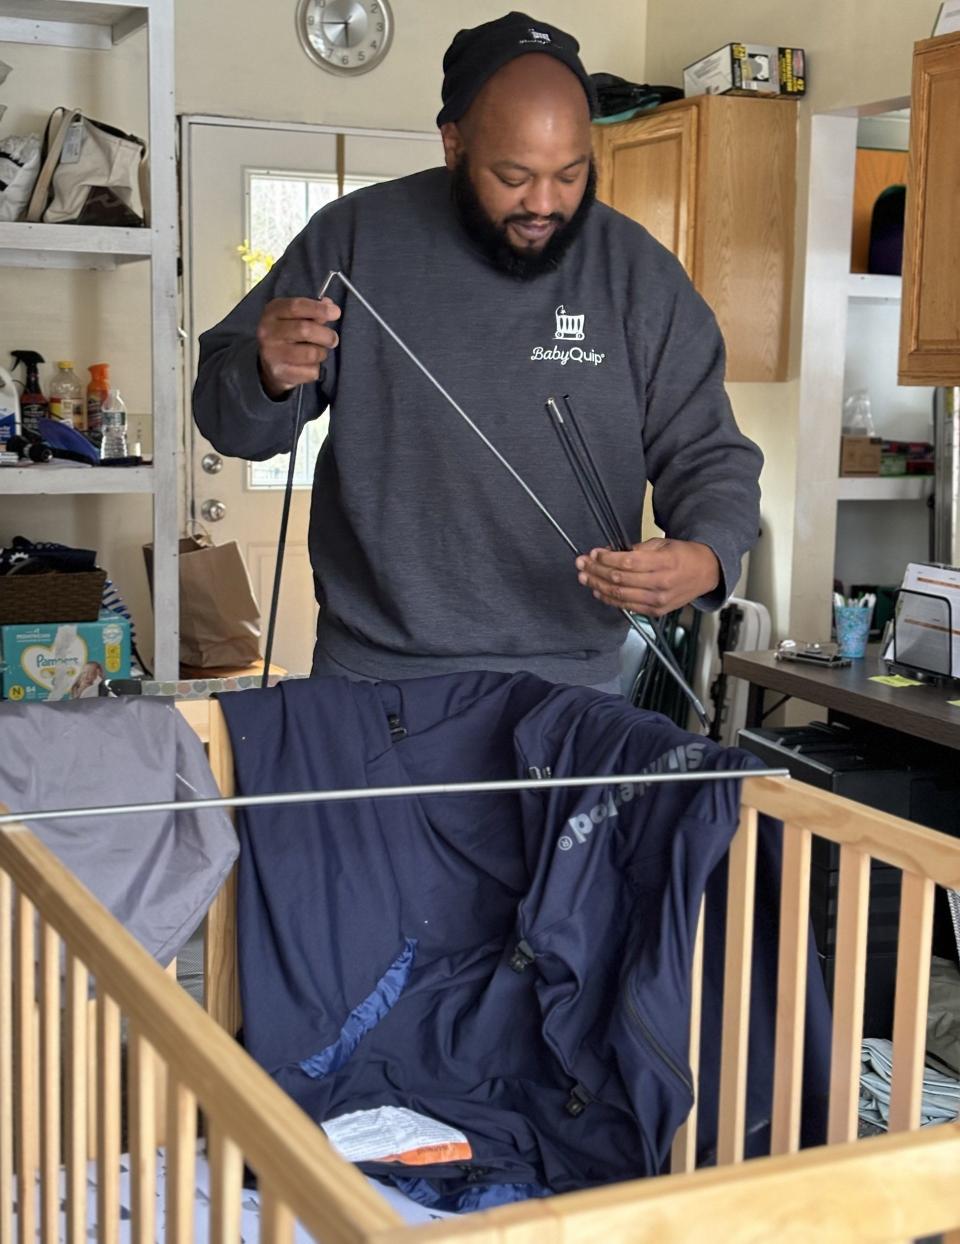 Al Harrison, of Wells, Maine, assembles a crib, one of many that BabyQuip rents out to its clients who lodge locally when on vacation. Harrison delivers baby gear and other traveling essentials to clients staying at local hotels, inns, resorts, and elsewhere.